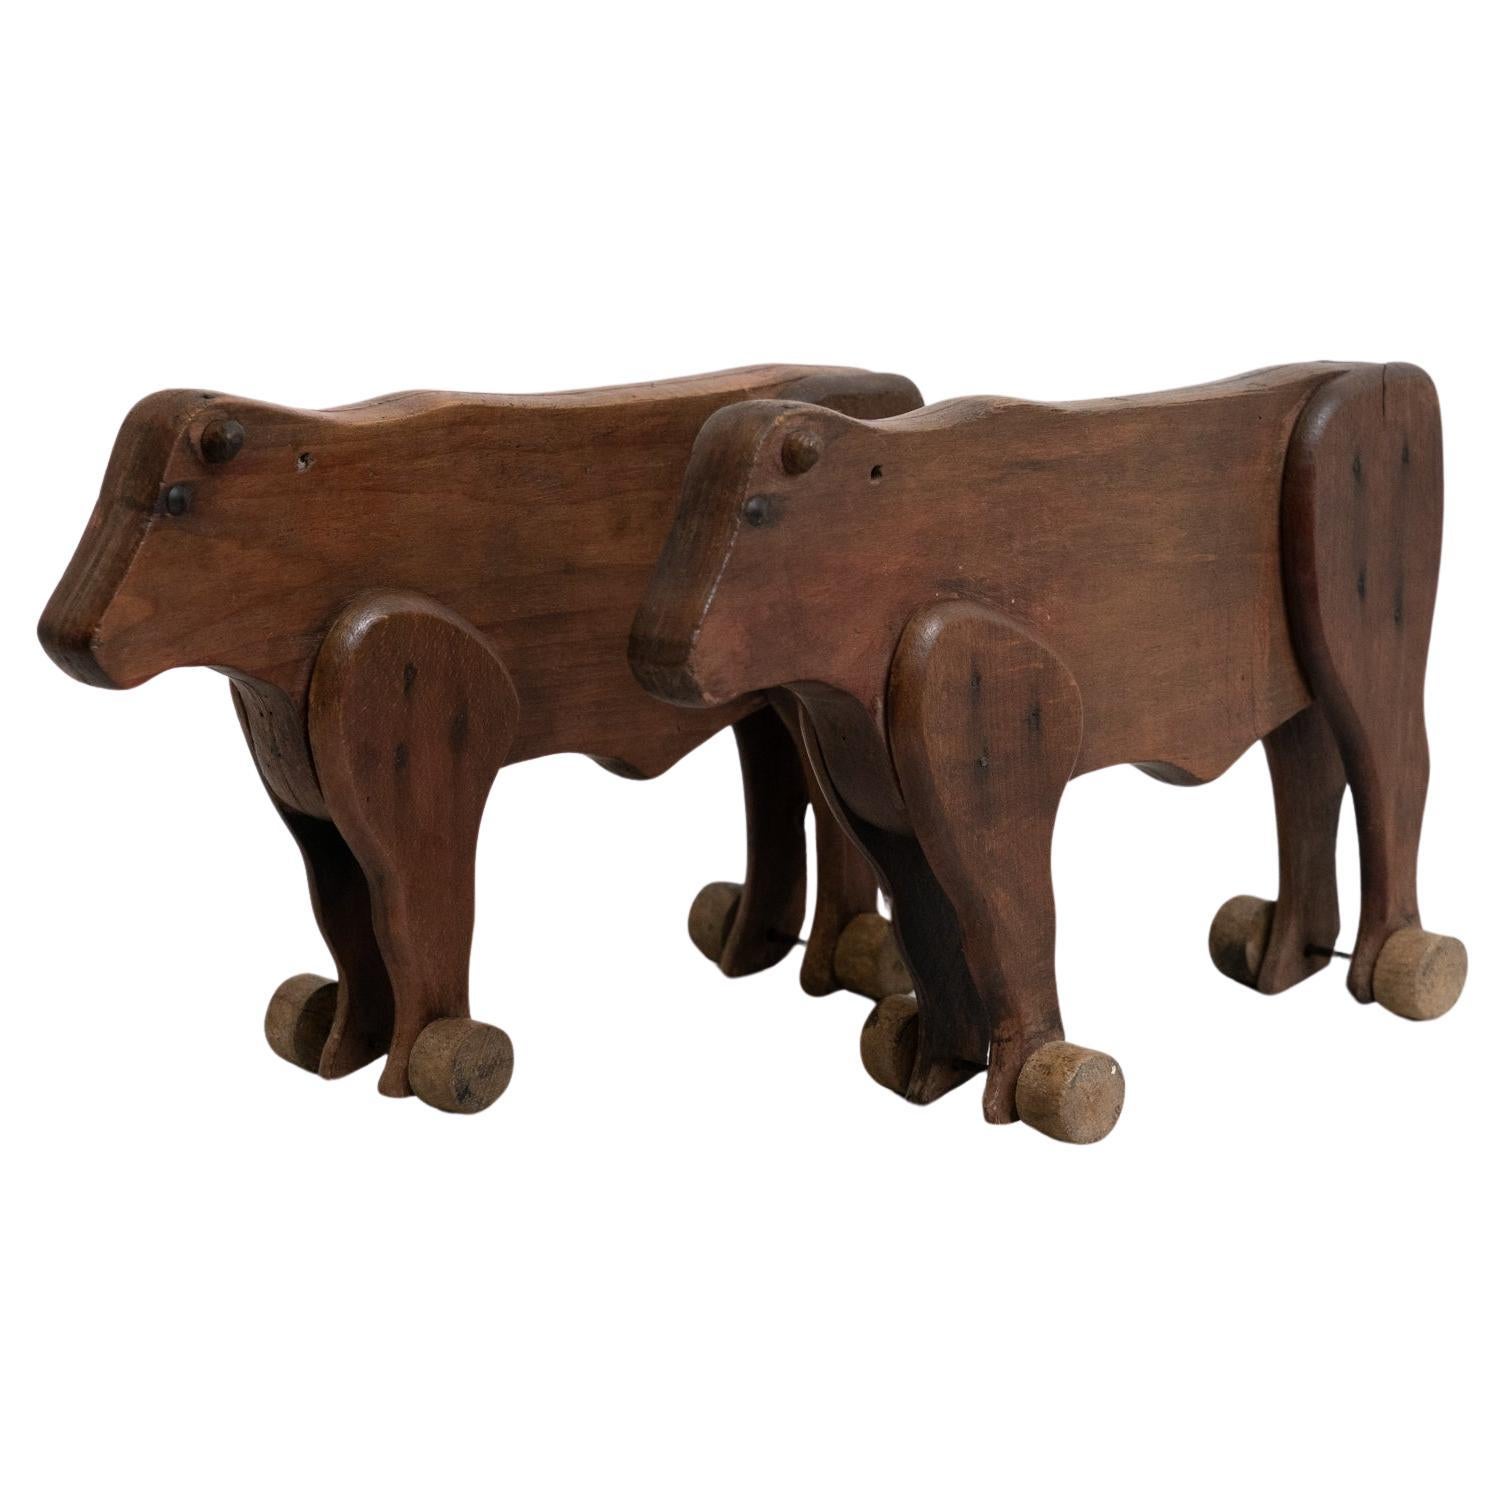 Set of Two Early 20th Century Rustic Traditional Wood Cow Sculptures